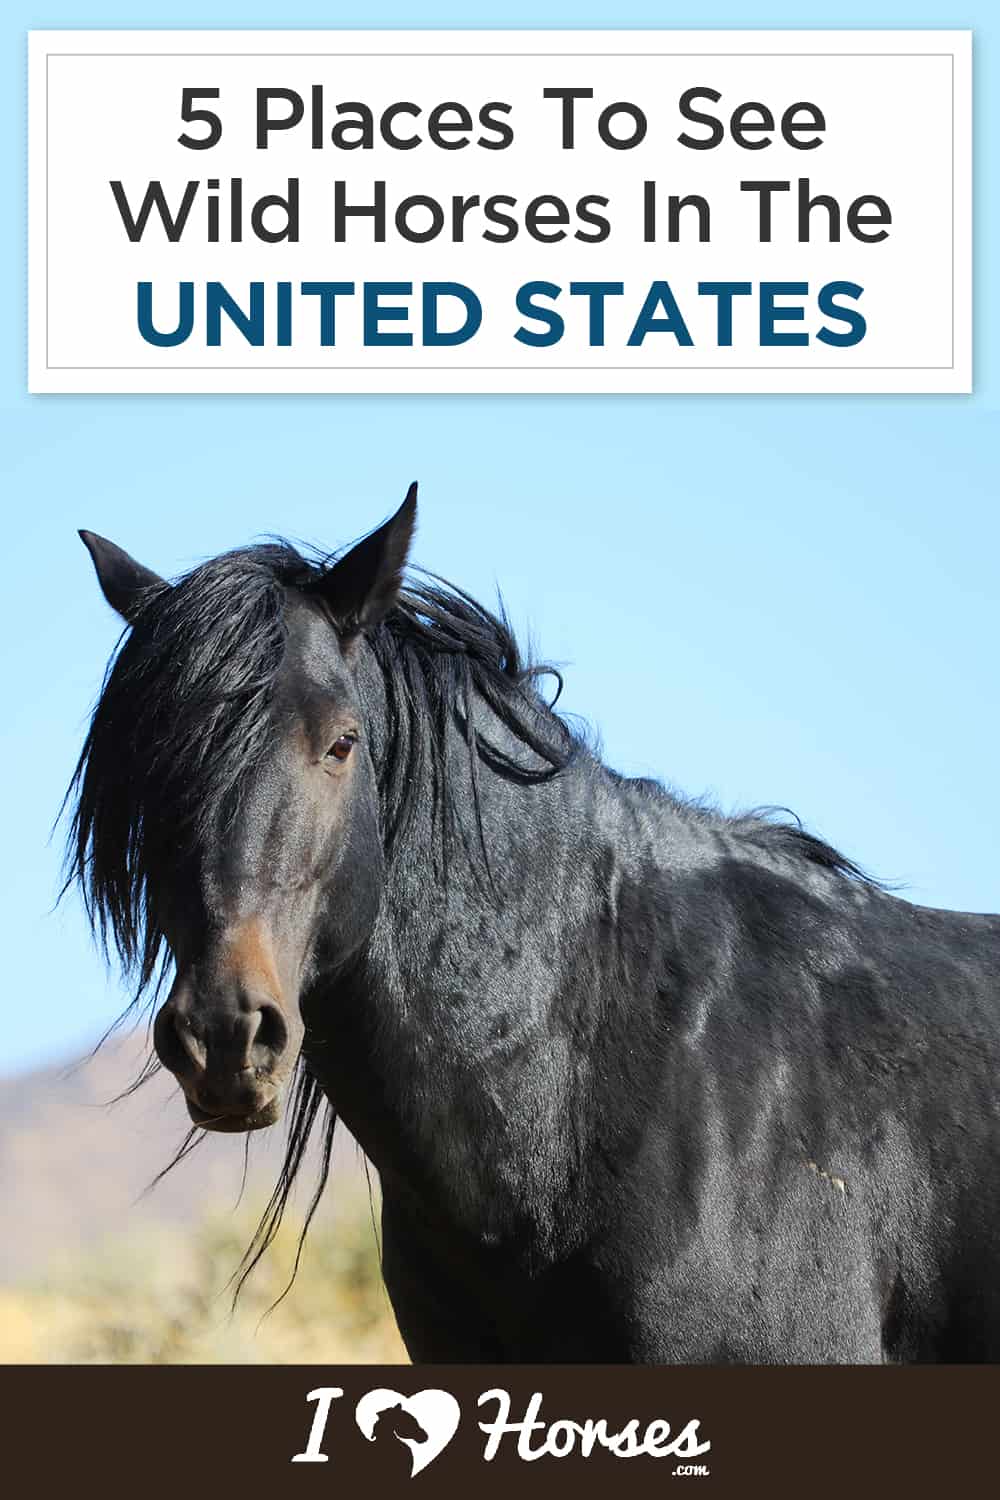 5 Places To See Wild Horses In The United States